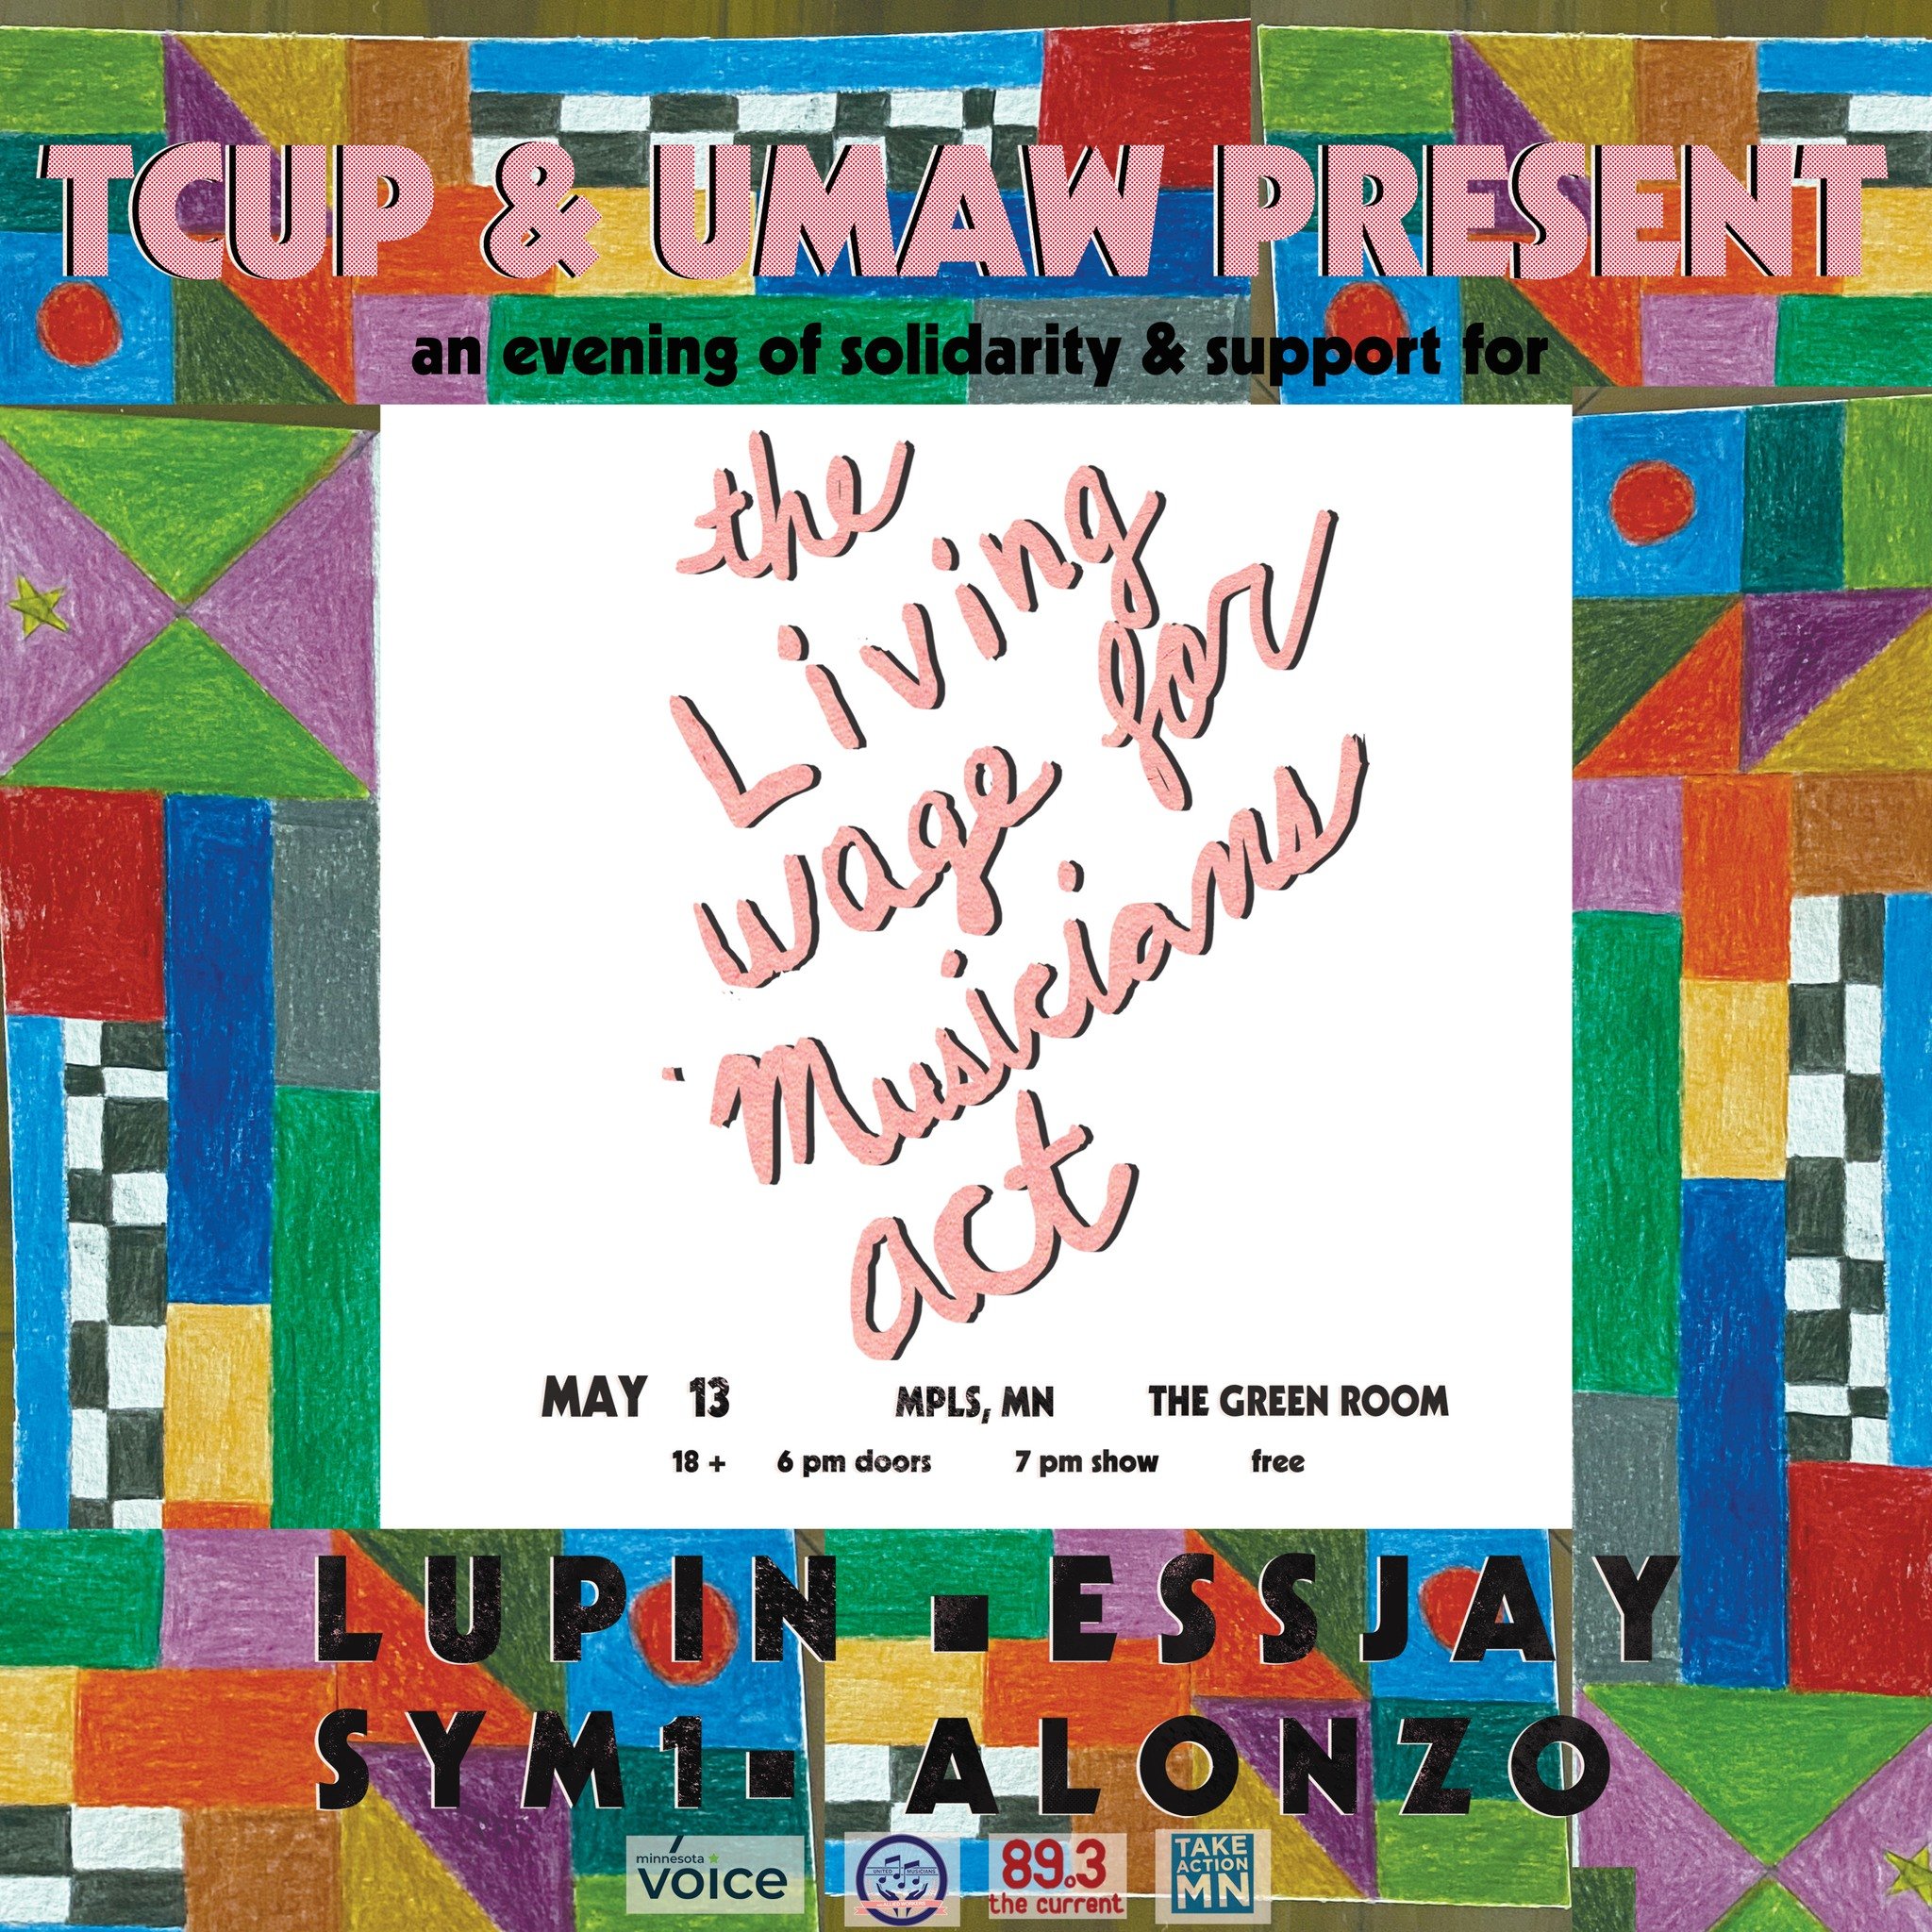 MN musicians are getting organized with Twin Cities United Performers @tcupmn! Check out their organizing at this free show on Monday May 13 at 7pm. Tickets in bio.

From Uber and Lyft drivers to musicians, workers are standing up to tech companies a